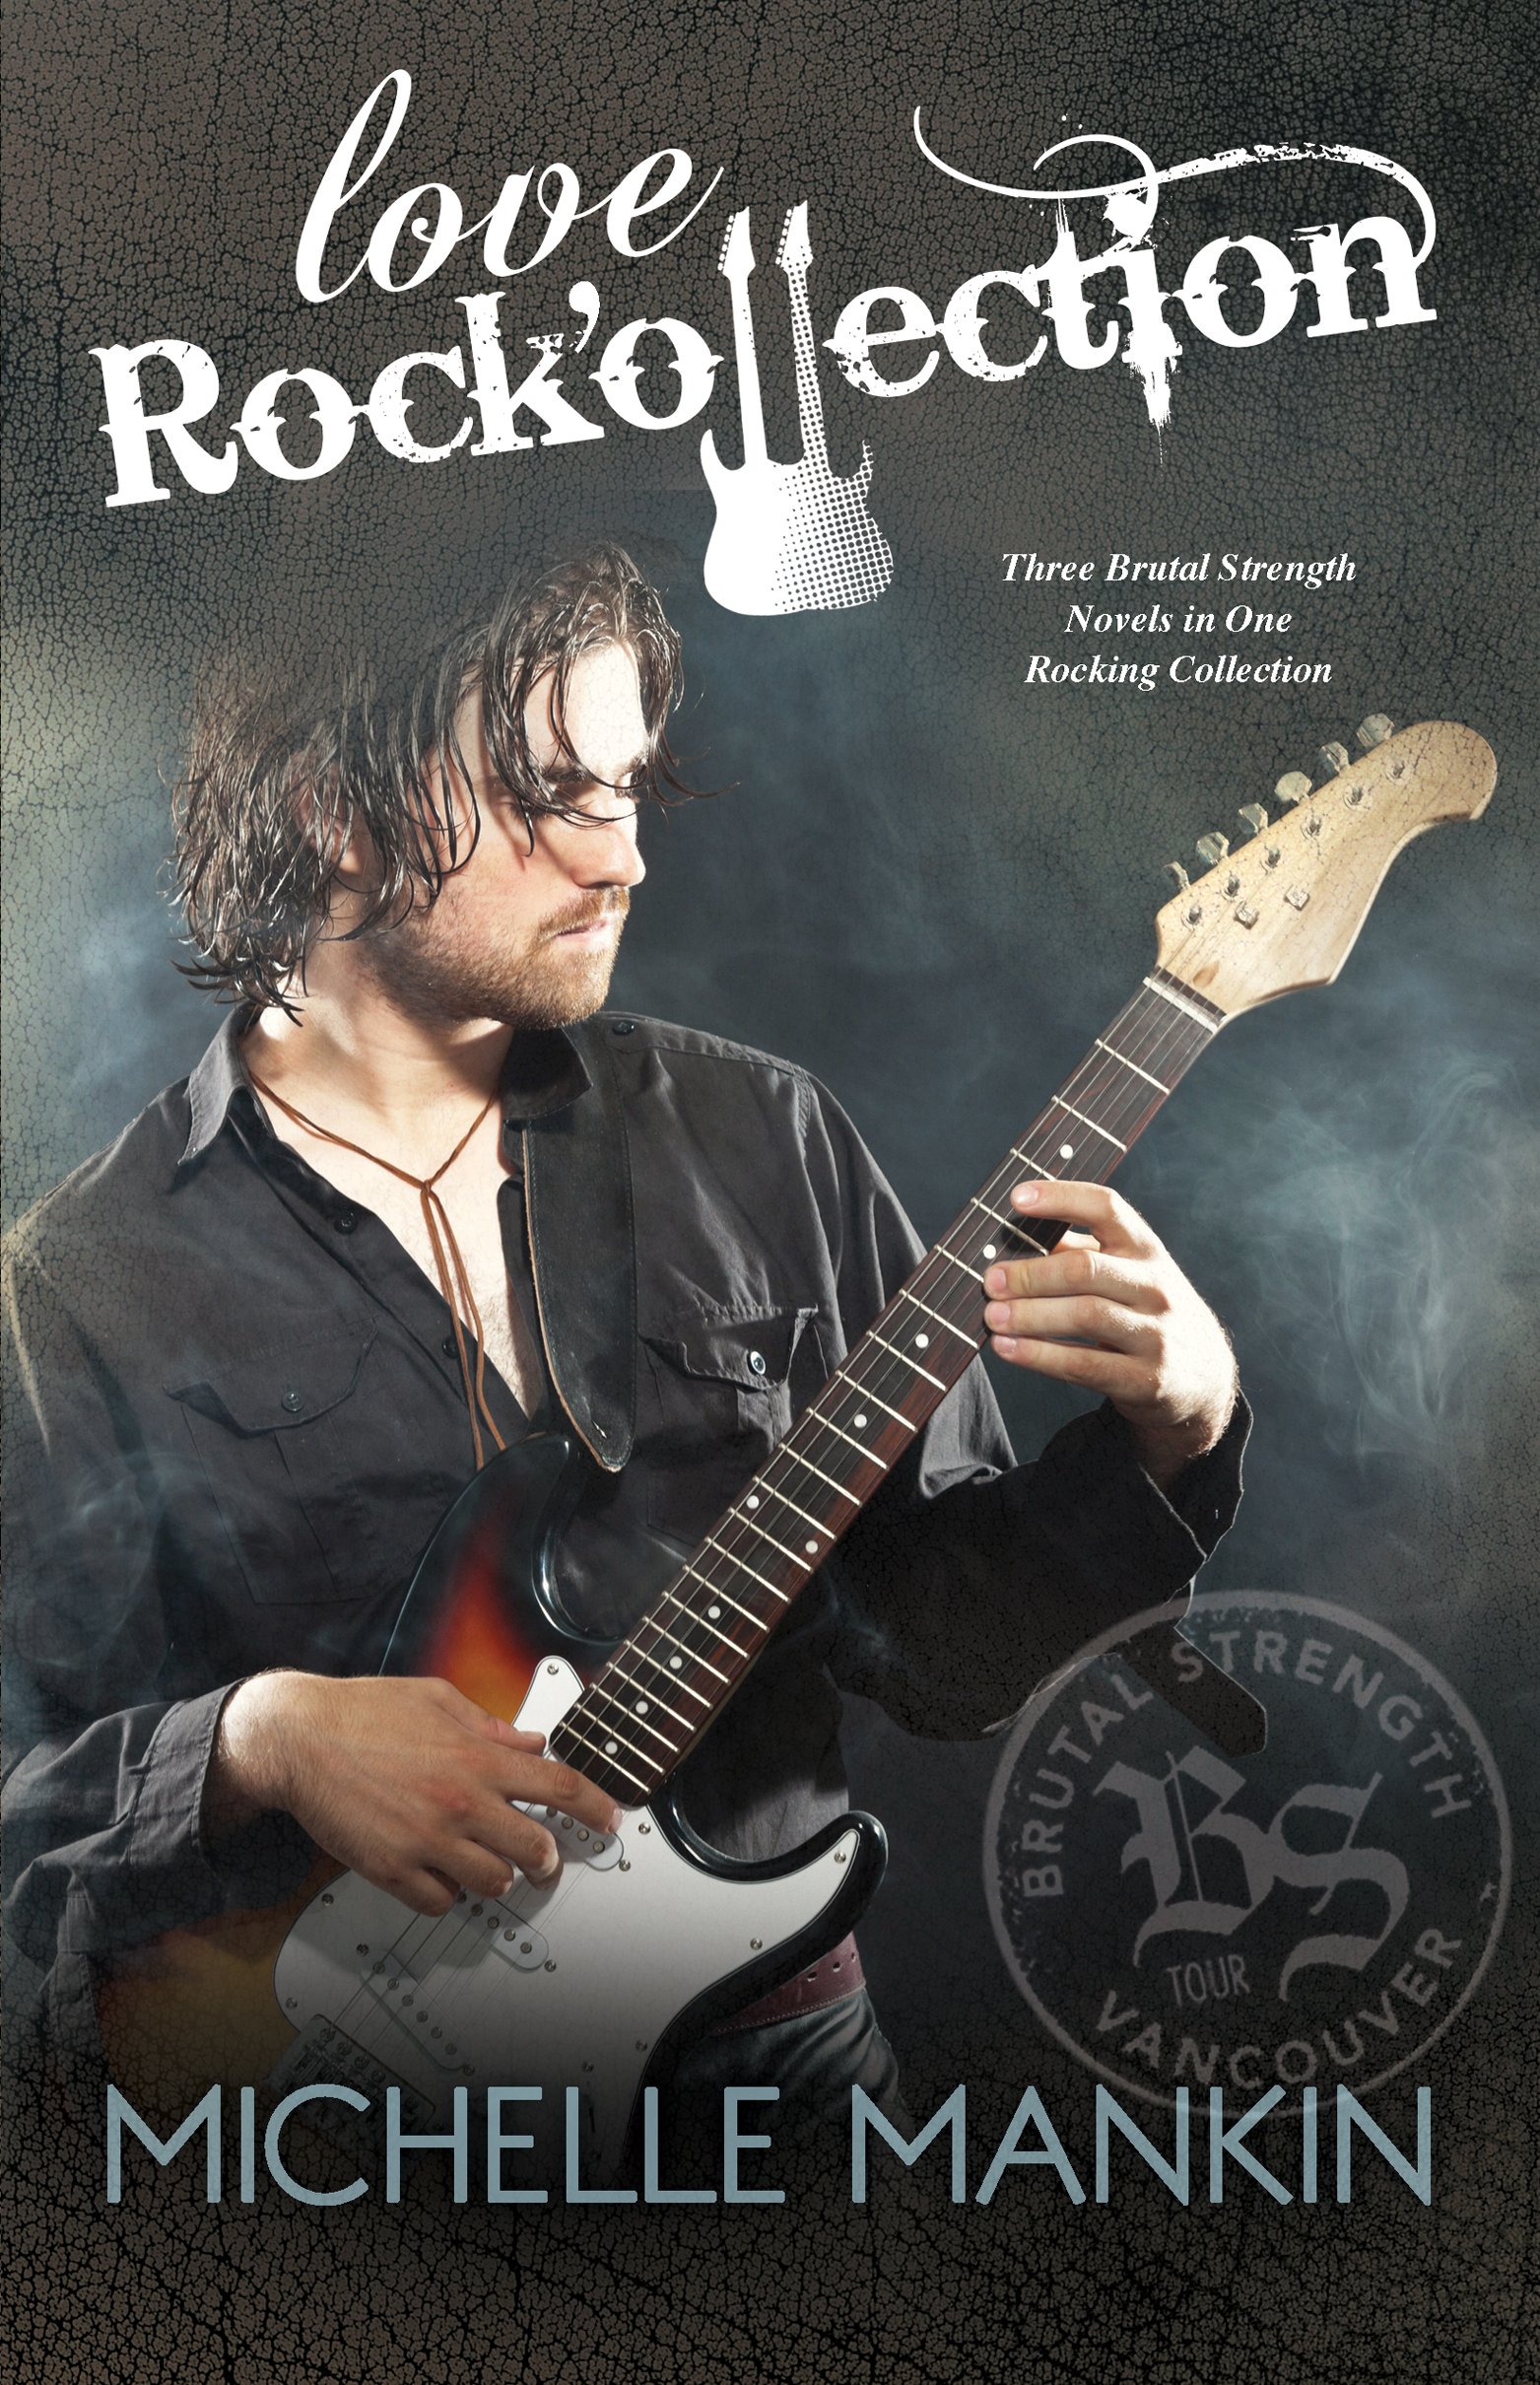 Book Cover Love Rock'ollection: The Brutal Strength Rock Star Trilogy, books 1-3